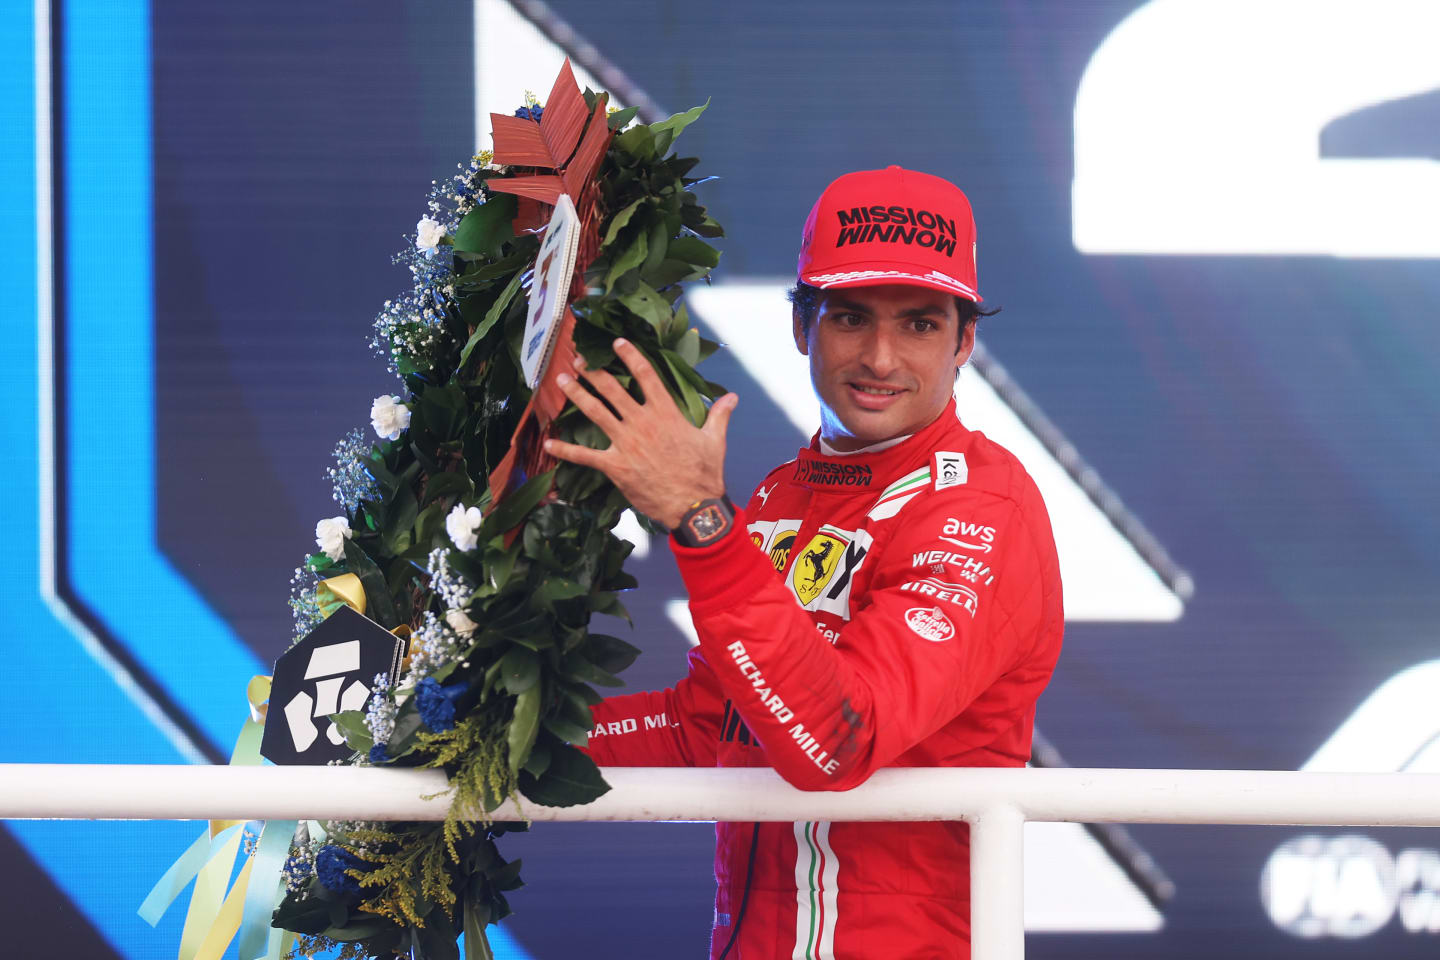 SAO PAULO, BRAZIL - NOVEMBER 13: Third placed Carlos Sainz of Spain and Ferrari celebrates after the sprint ahead of the F1 Grand Prix of Brazil at Autodromo Jose Carlos Pace on November 13, 2021 in Sao Paulo, Brazil. (Photo by Lars Baron/Getty Images)